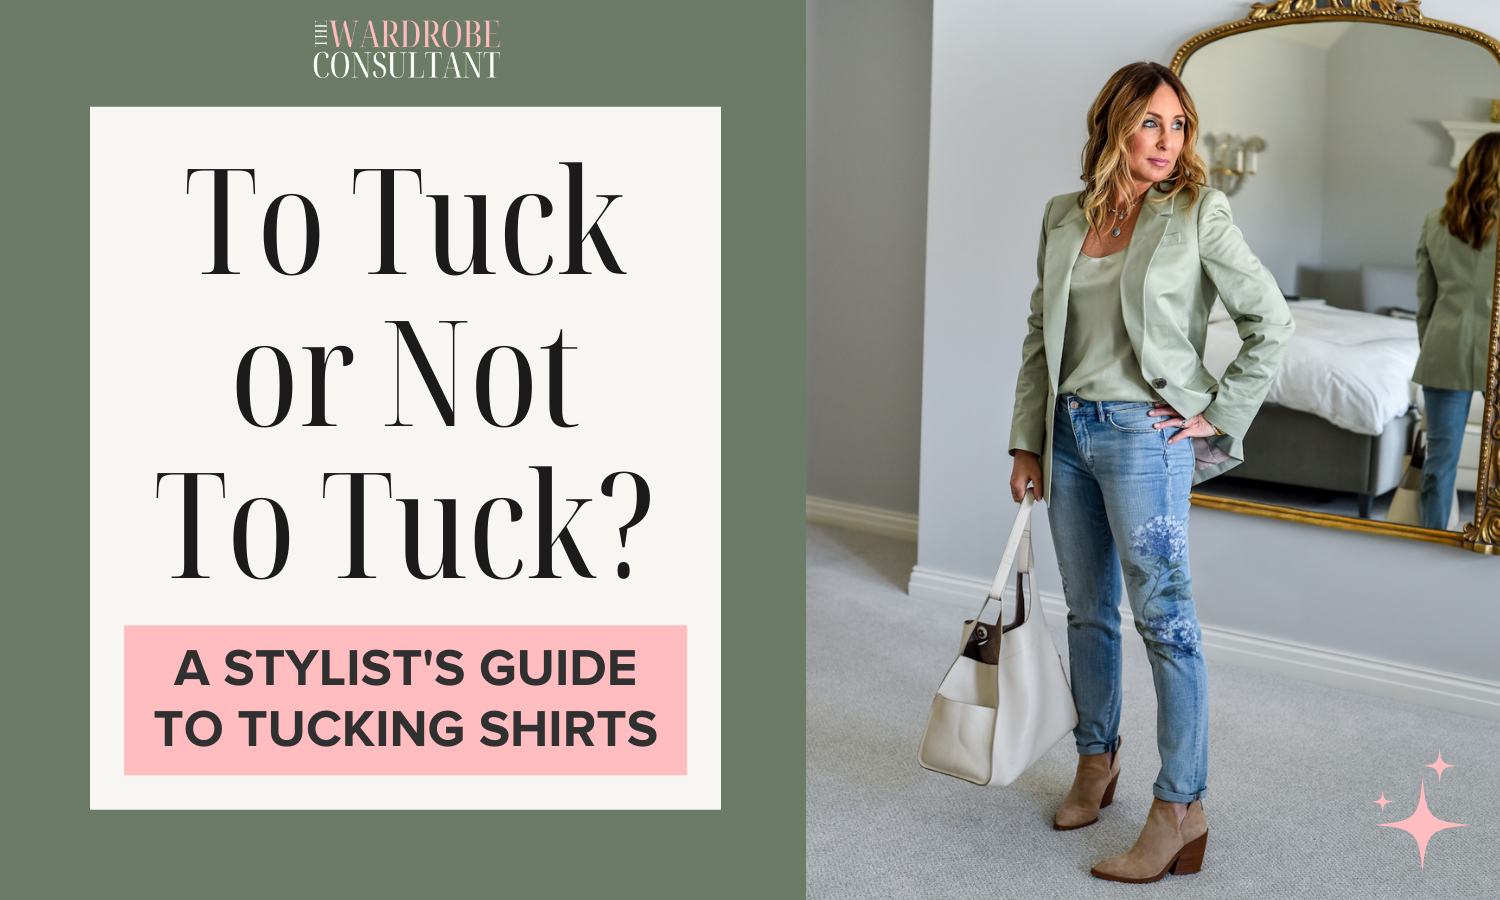 To Tuck or Not To Tuck? Guide To Tucking Shirts — The Wardrobe Consultant